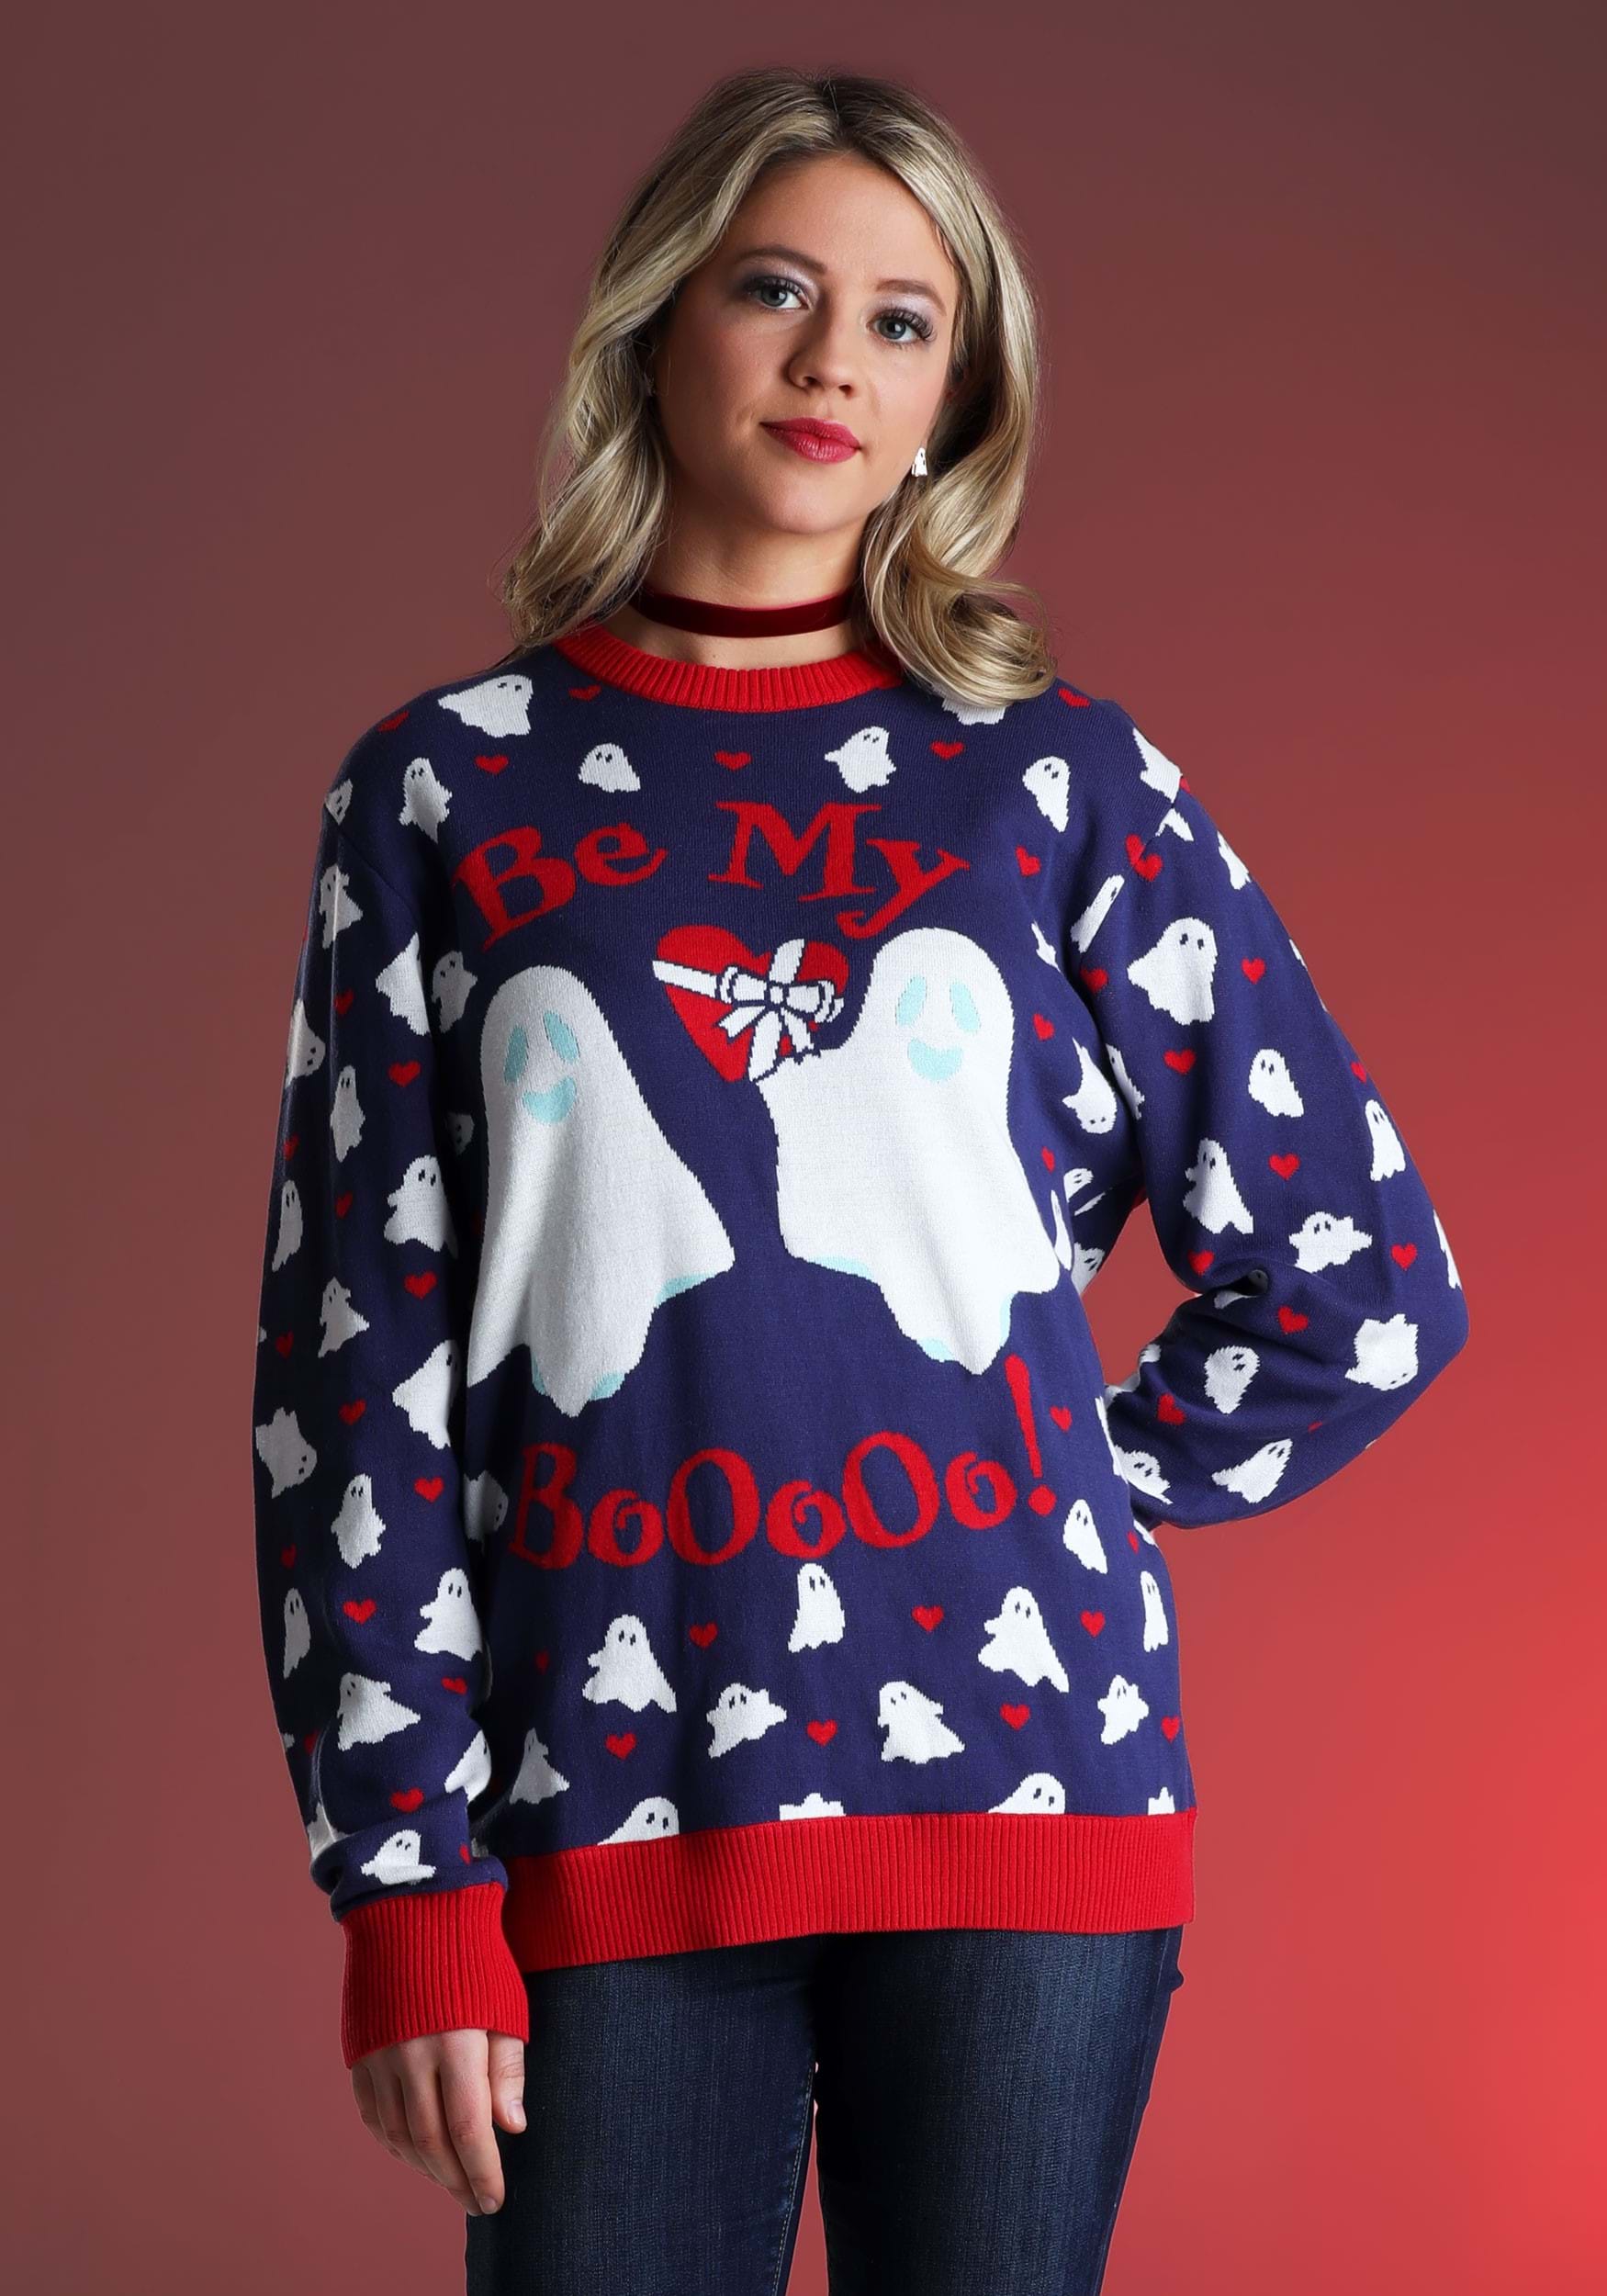 Be My Boo Valentine’s Day Sweater for Adults